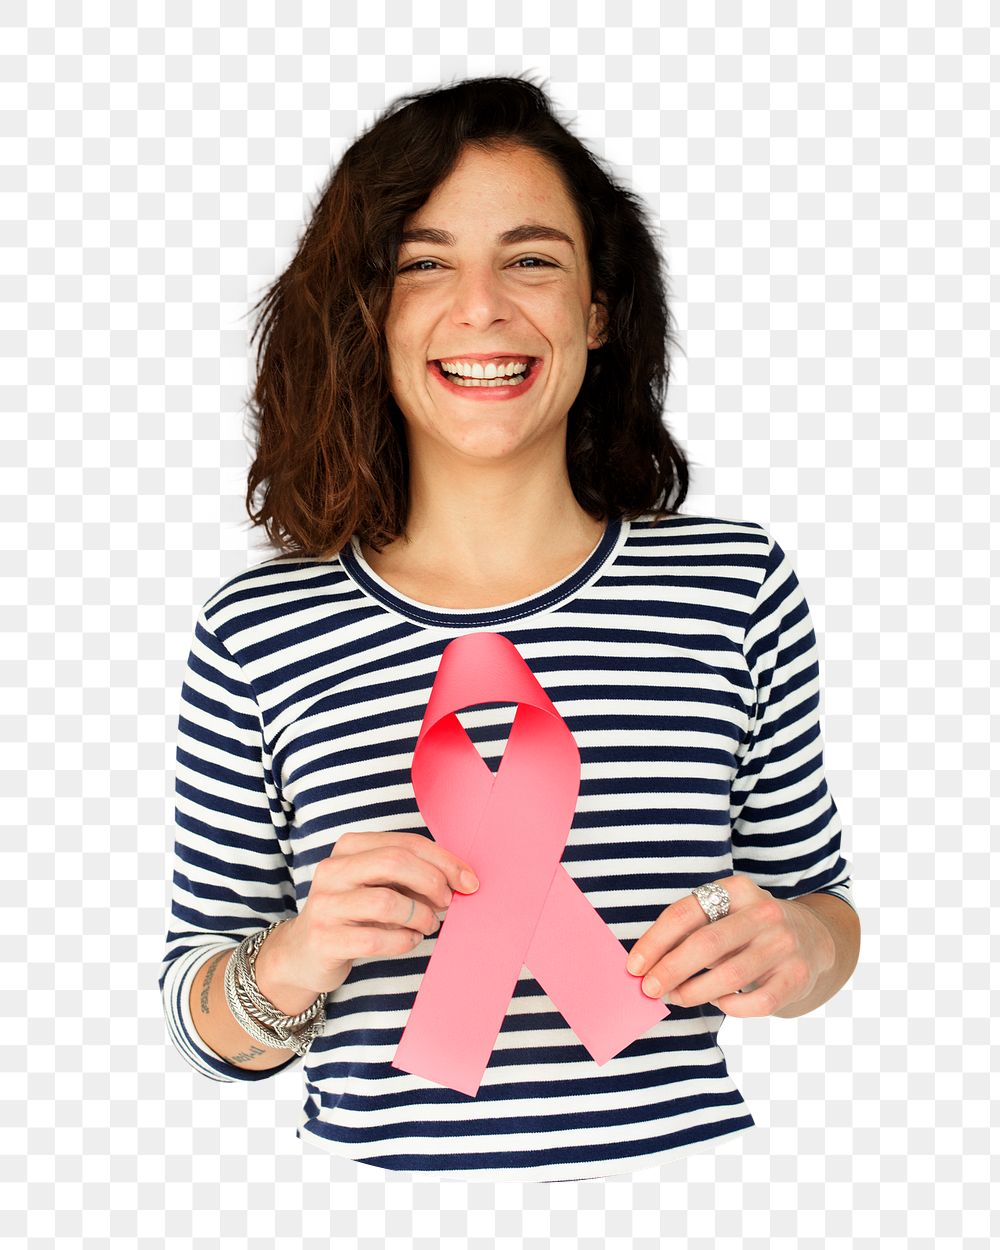 Woman png holding pink ribbon, cancer awareness campaign, transparent background